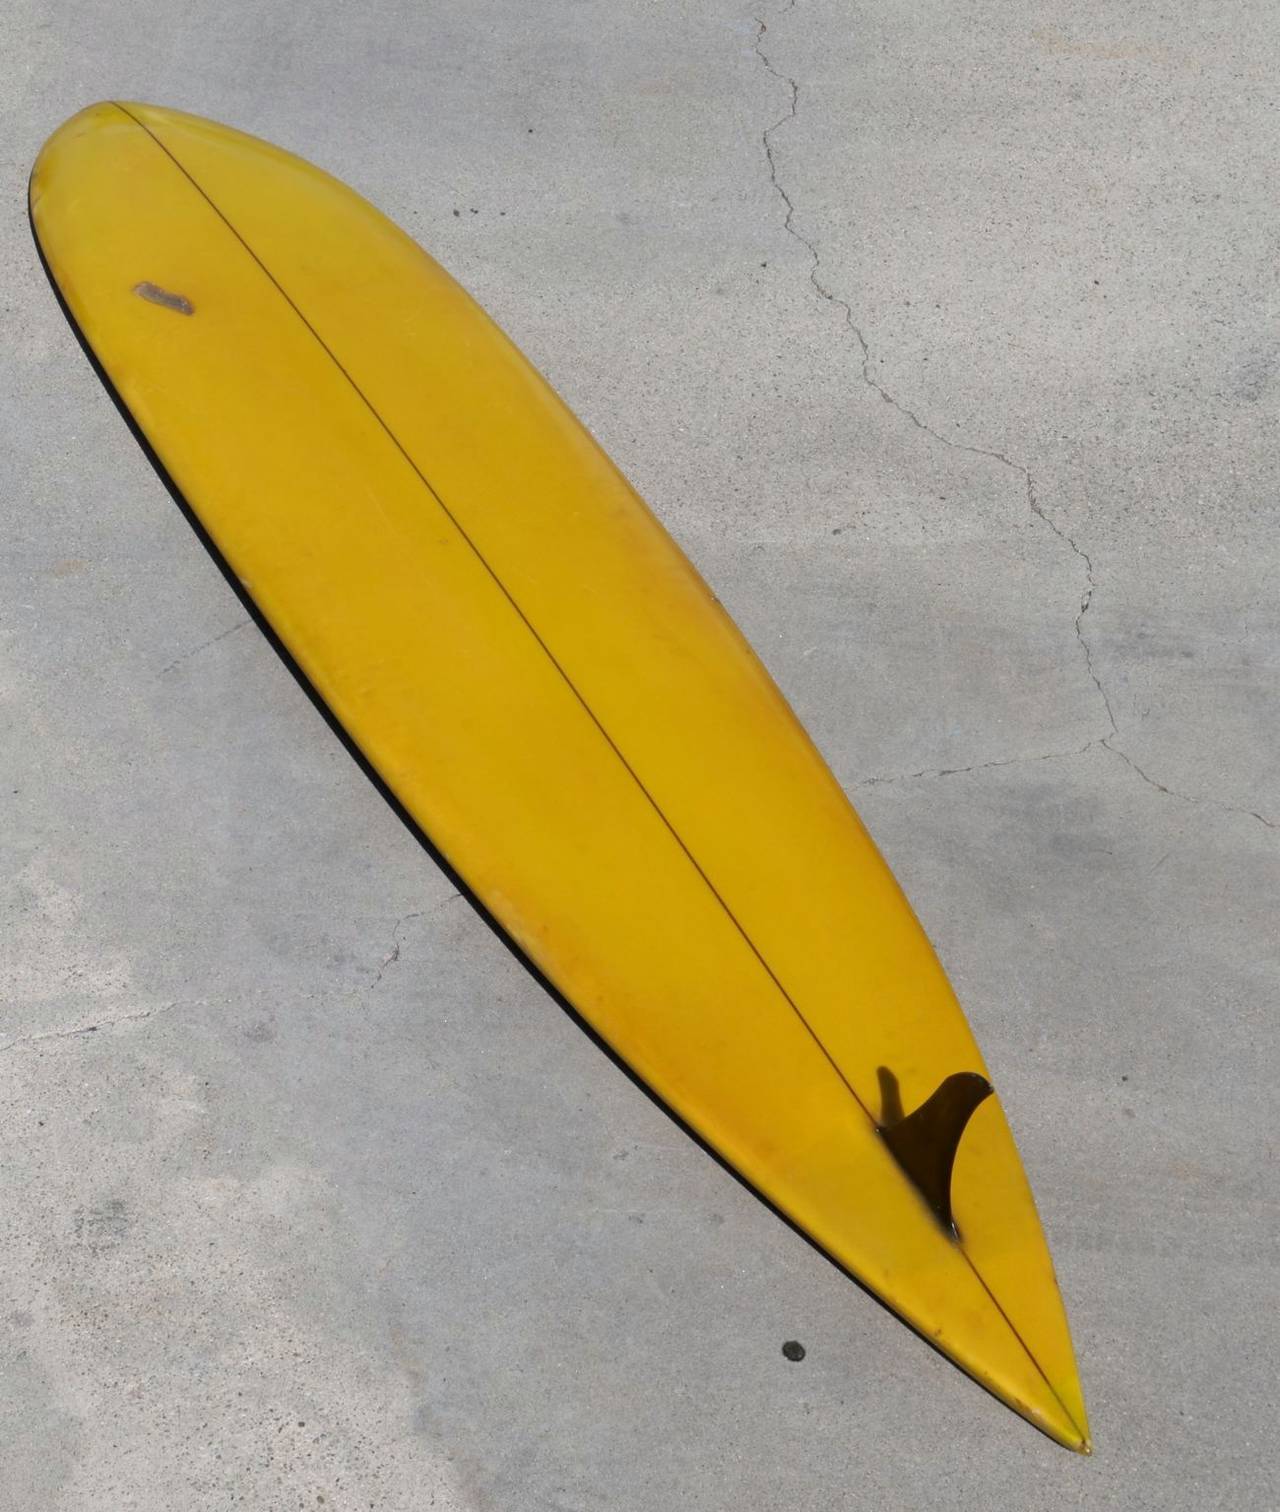 Beautiful Hawaiian big wave gun handcrafted the 'Old School' backyard way. This stellar board has style, panache and just a little swagger. Vibrant yellow rails with black pinstripe surround a paisley design of green, blue and dark red. The yellow